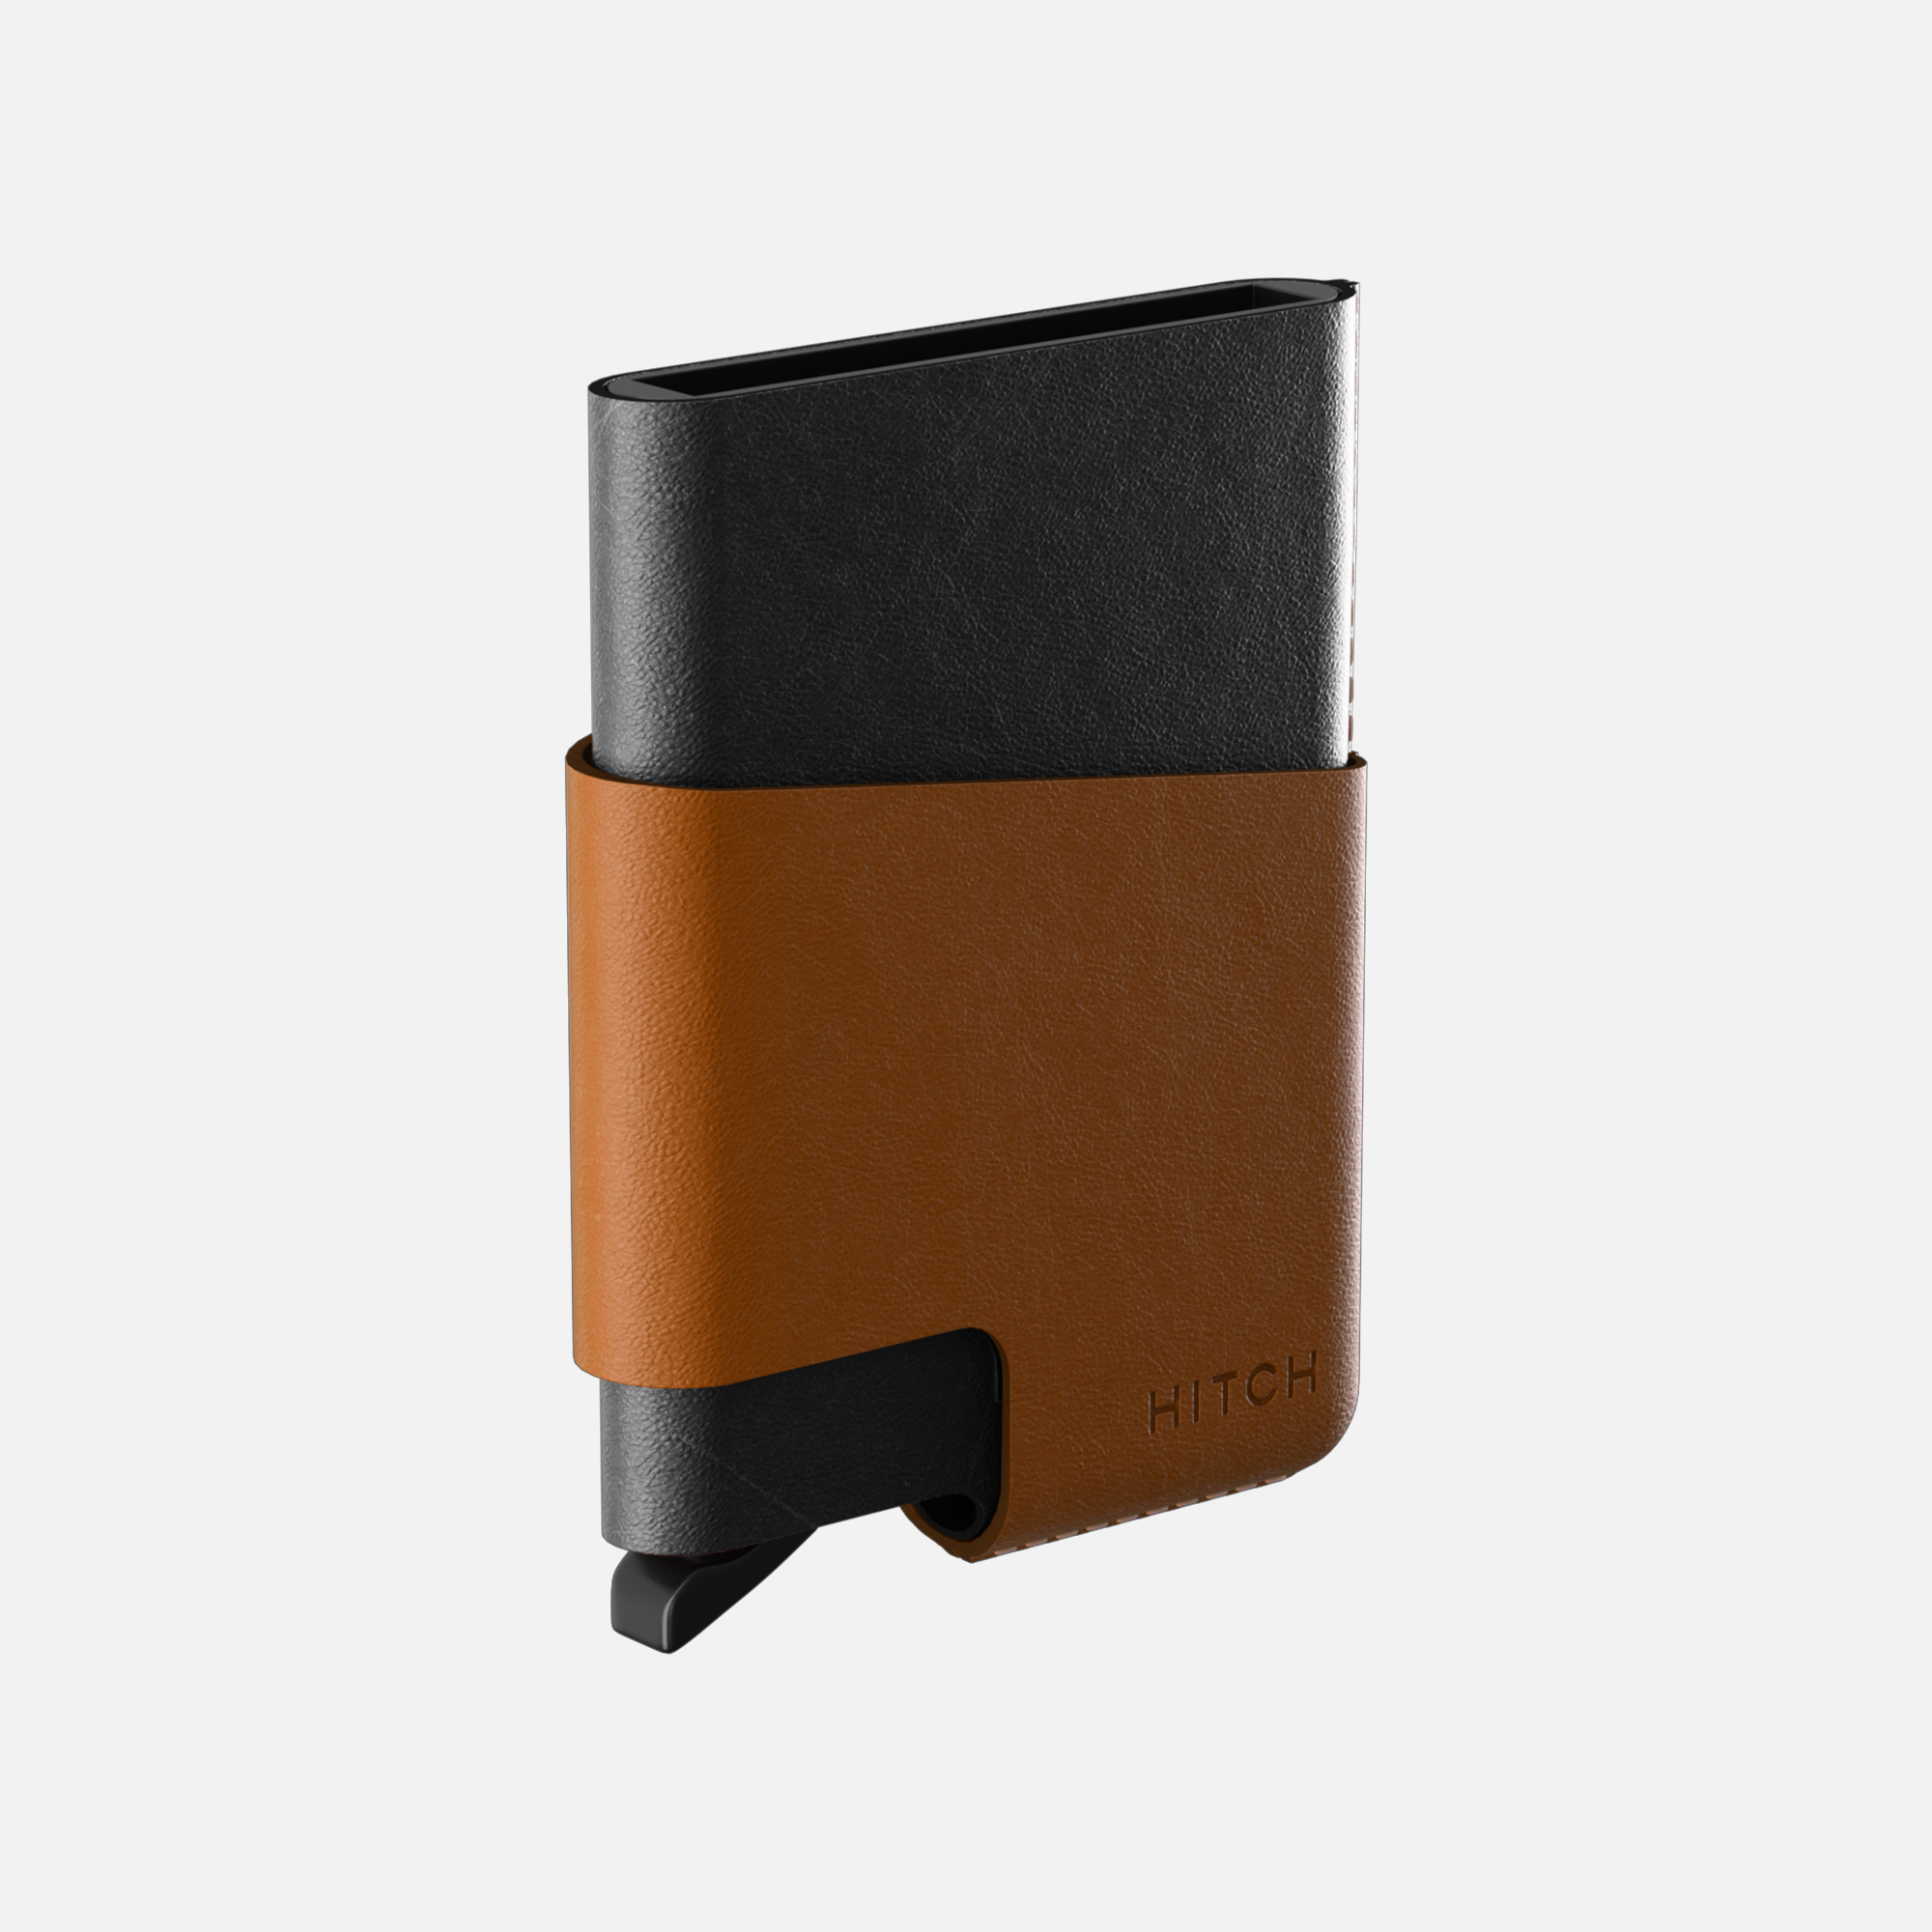 Black and brown leather wallet with card slot and engraved brand name HITCH".